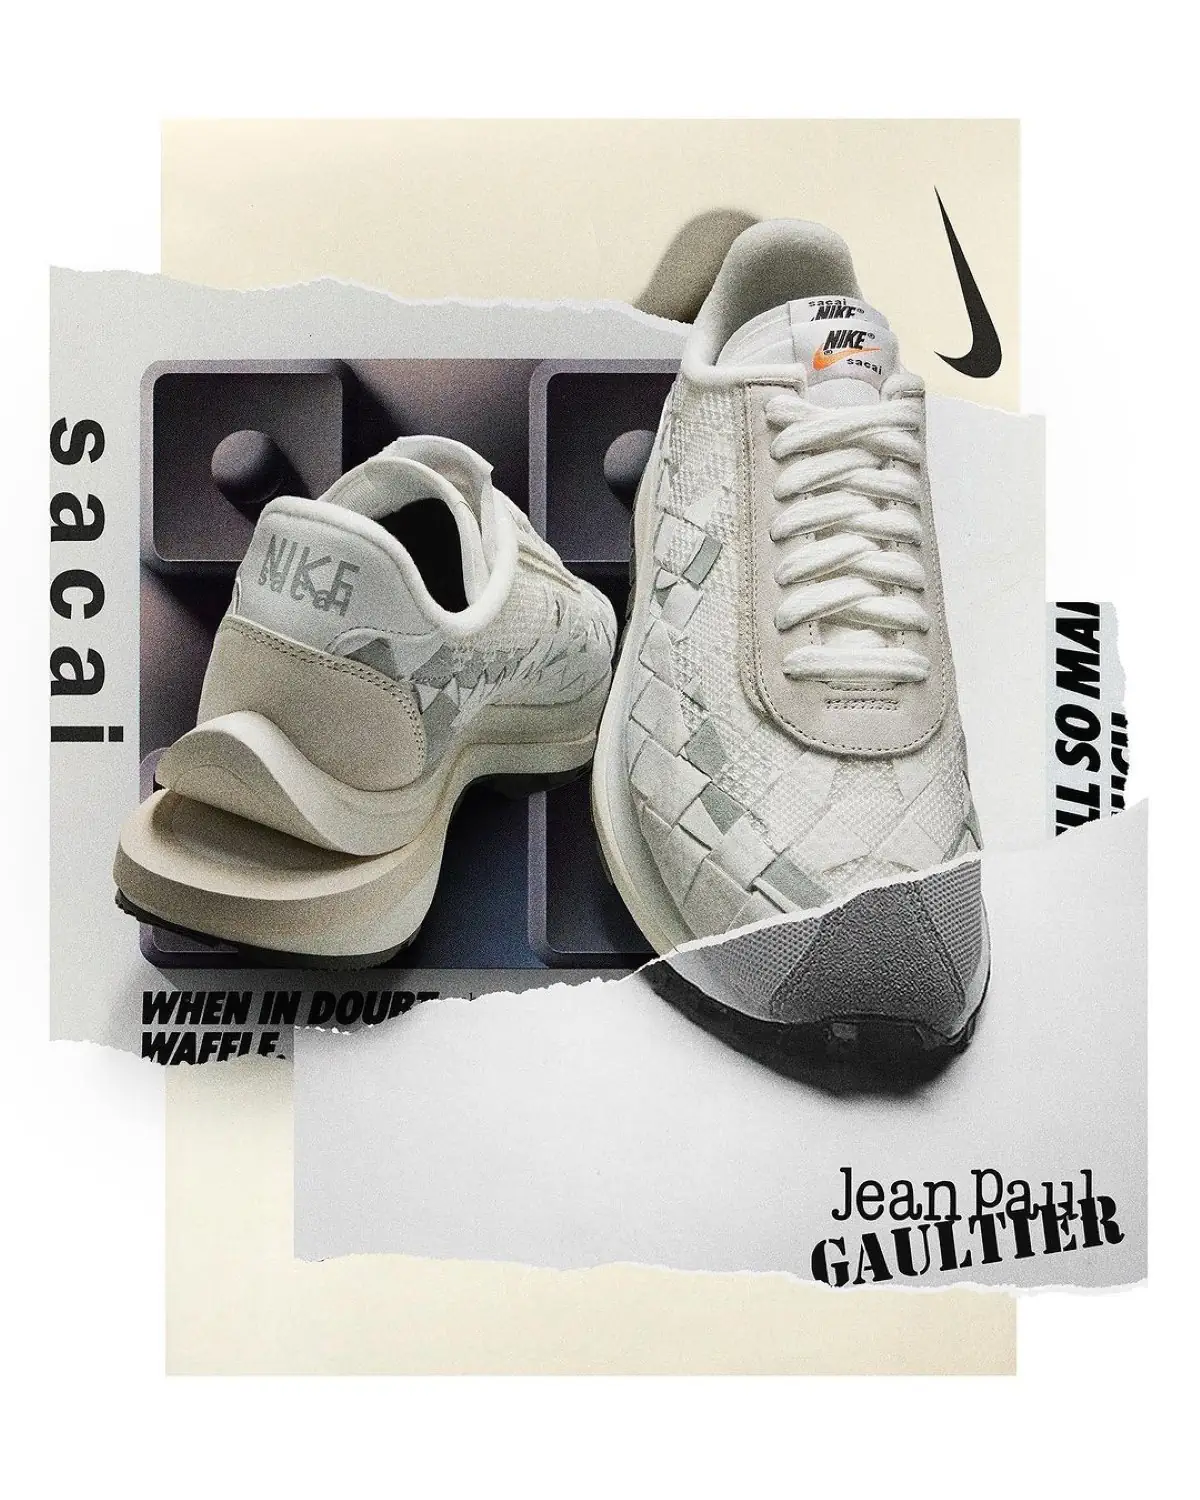 Jean Paul Gaultier, Sacai and Nike reveal two exclusive VaporWaffle sneaker designs